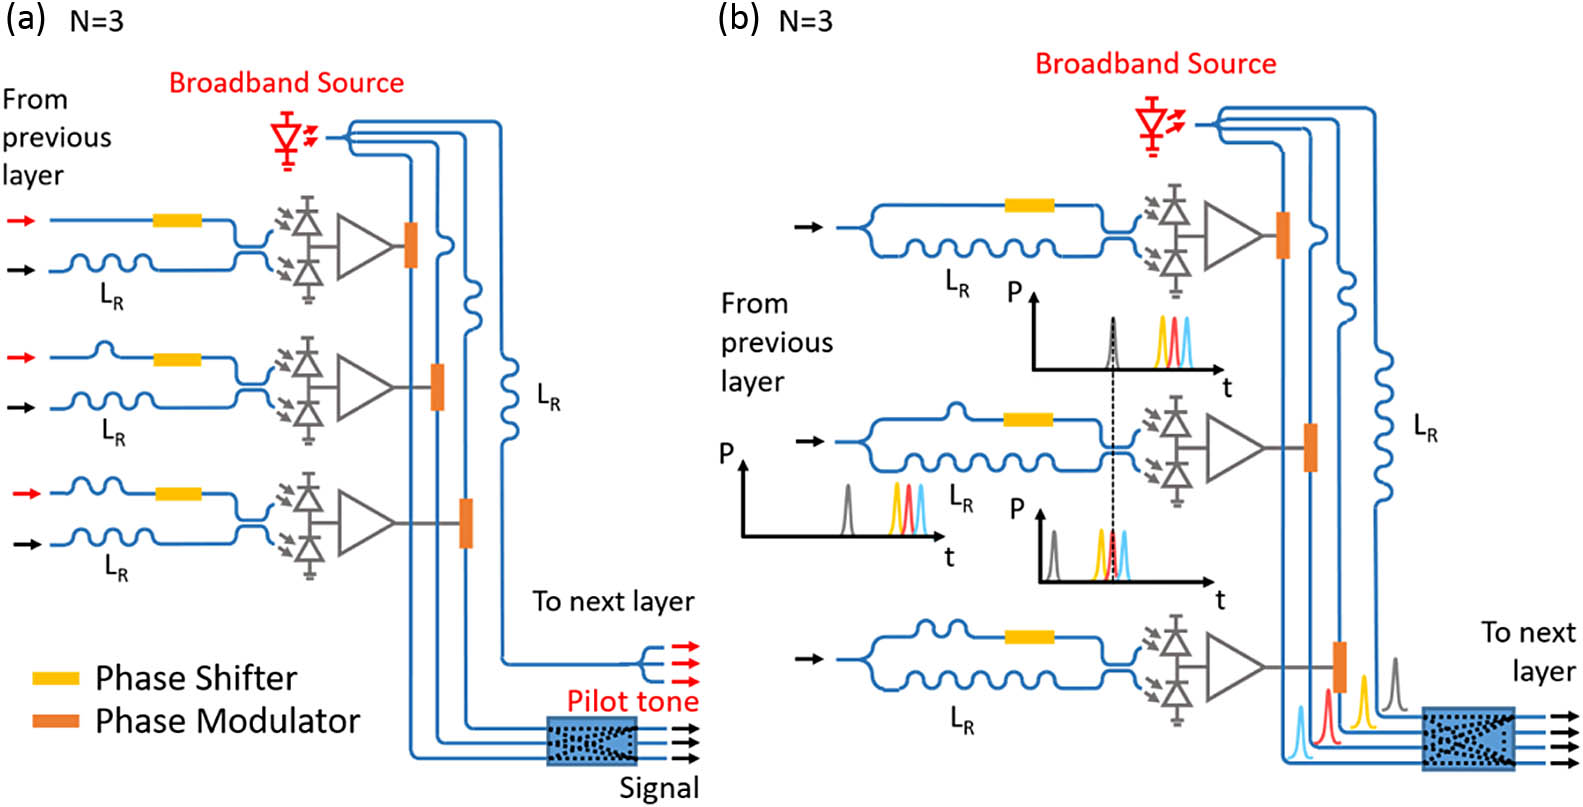 Orthogonal delay-division multiplexing scheme represented for N=3. (a) Power-budget-optimized network architecture, with pilot tone distributed to the downstream layer with separate waveguides. Red and black arrows represent the pilot tone and signals, respectively. (b) Fabrication-tolerant architecture in which the pilot tone and signals are guided together. A time-domain representation of a pulse-based network is also shown.